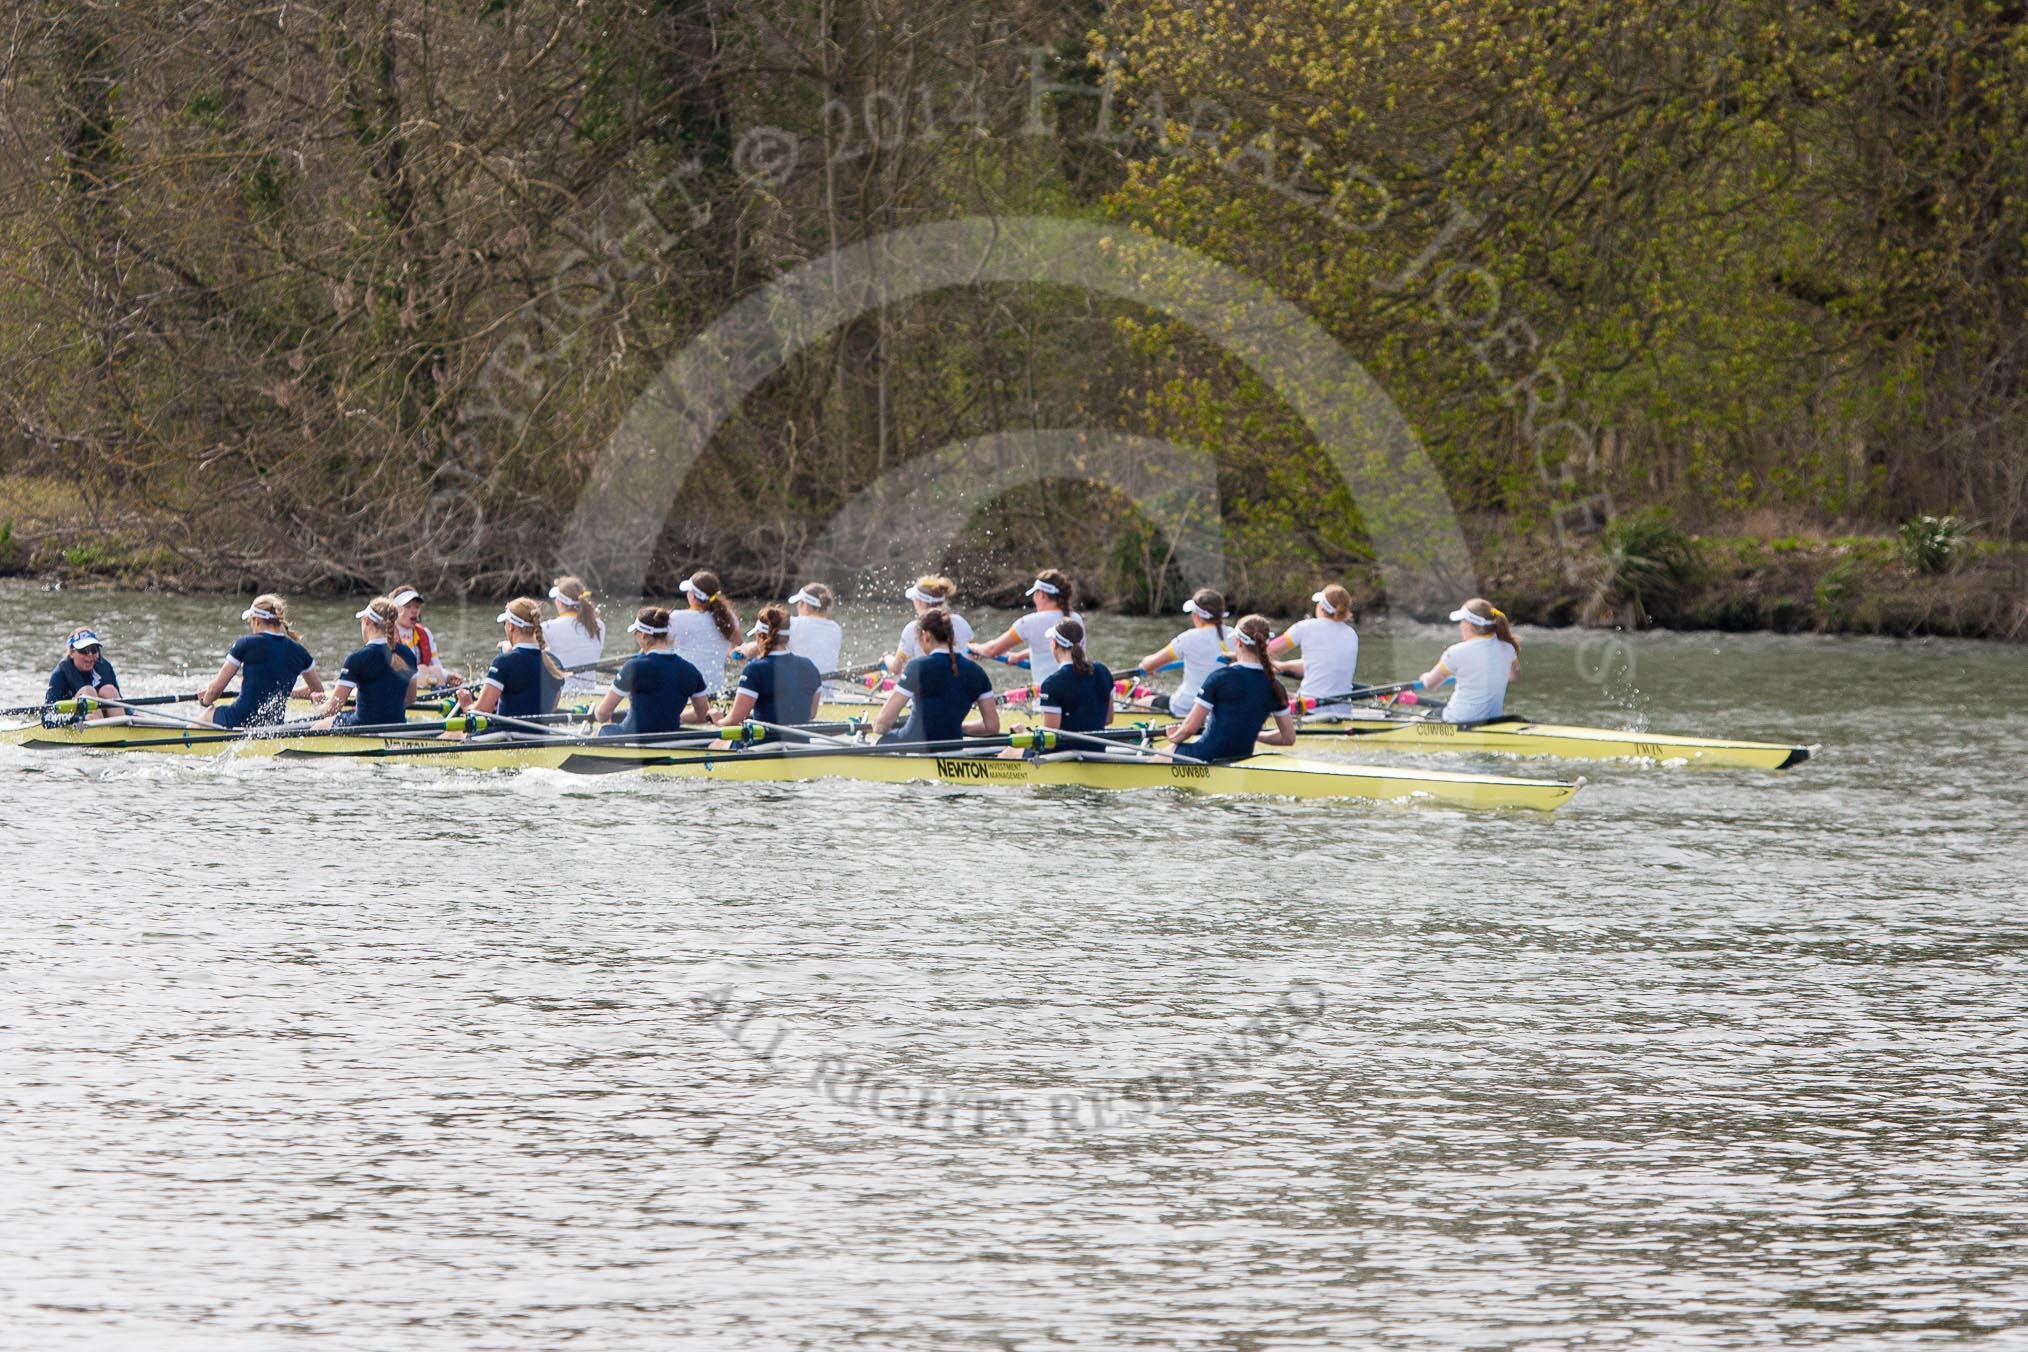 The Women's Boat Race and Henley Boat Races 2014: The Women's Reserves - Osiris v. Blondie race. Osiris (Oxford) on the left,  and Blondie (Cambridge) are quite close together again..
River Thames,
Henley-on-Thames,
Buckinghamshire,
United Kingdom,
on 30 March 2014 at 14:16, image #156